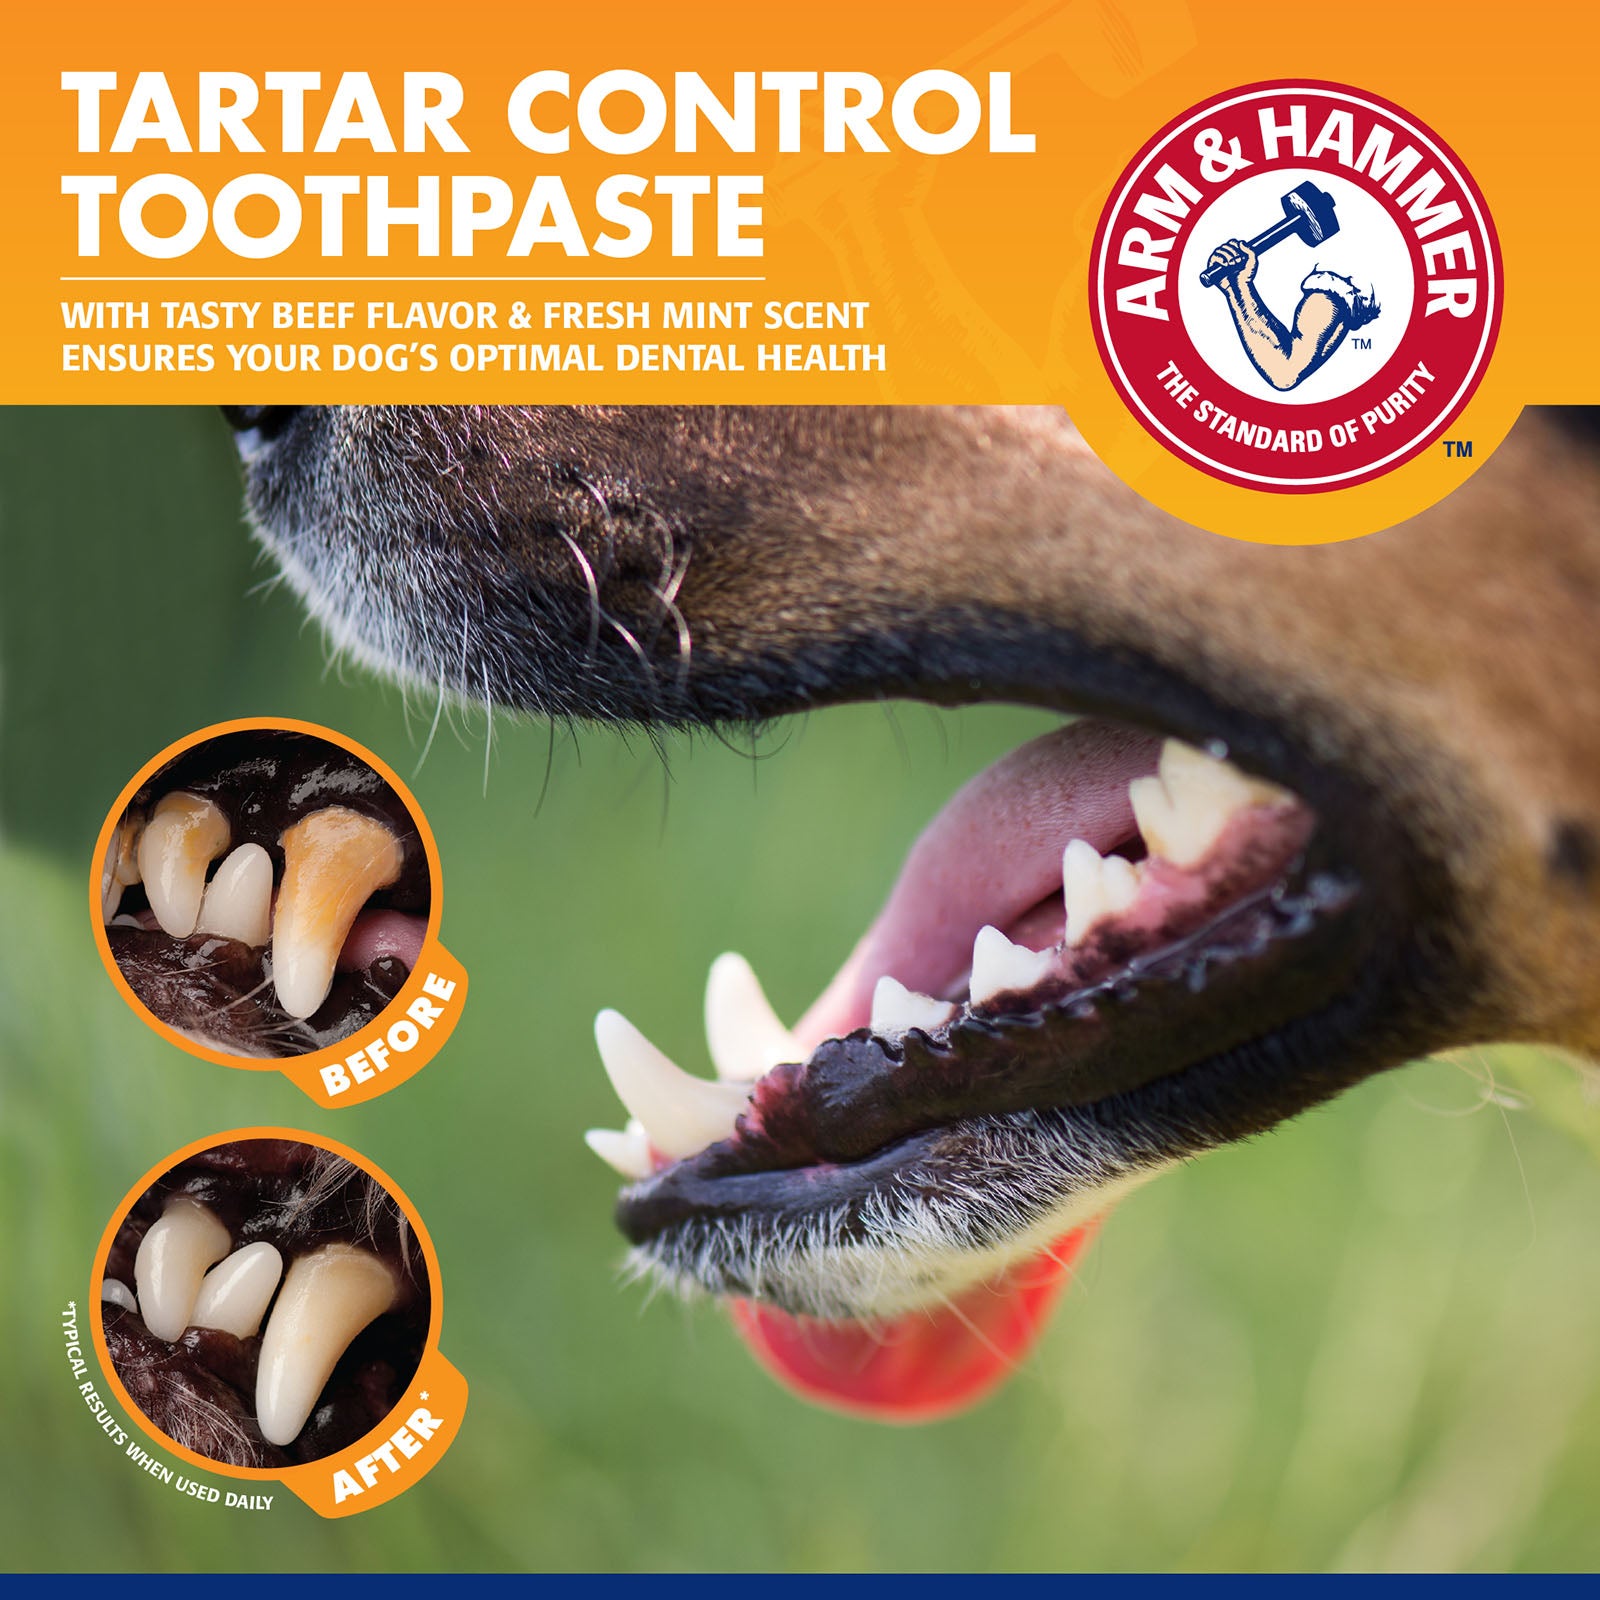 Arm &amp; Hammer™ Tartar Control Enzymatic Toothpaste for Dogs - Beef - Henlo Pets